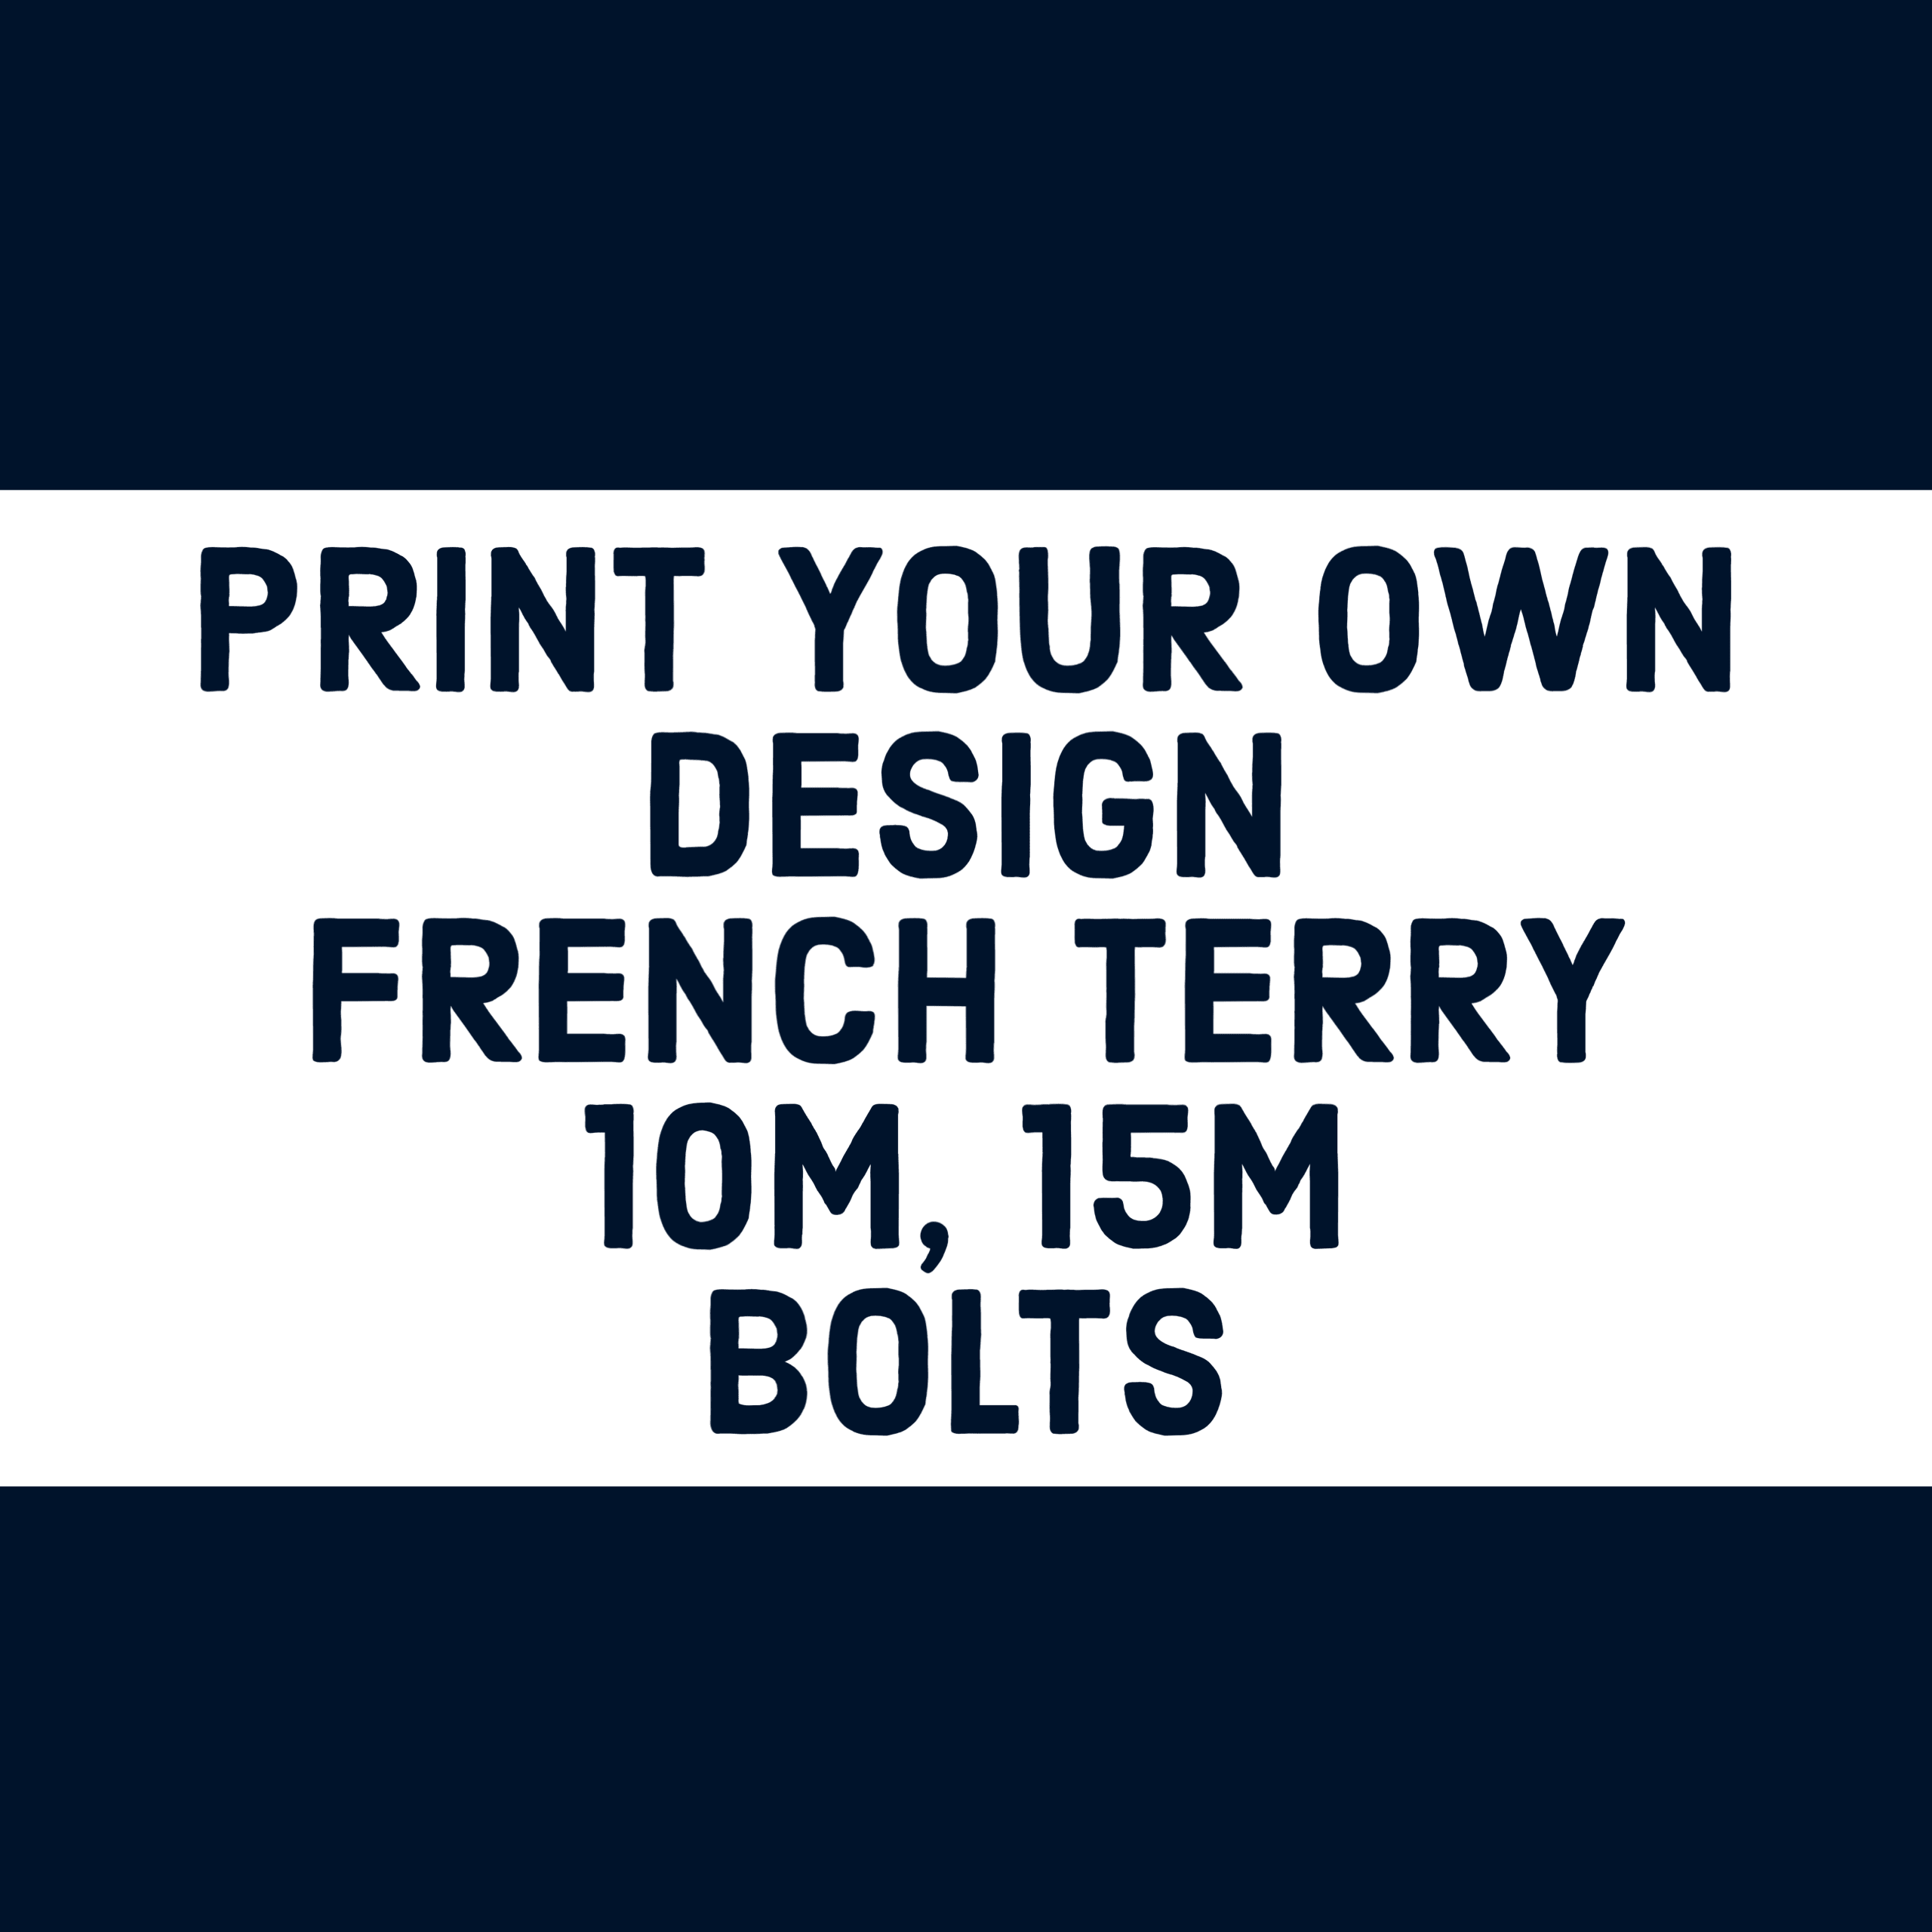 Print Your Own Design FRENCH TERRY